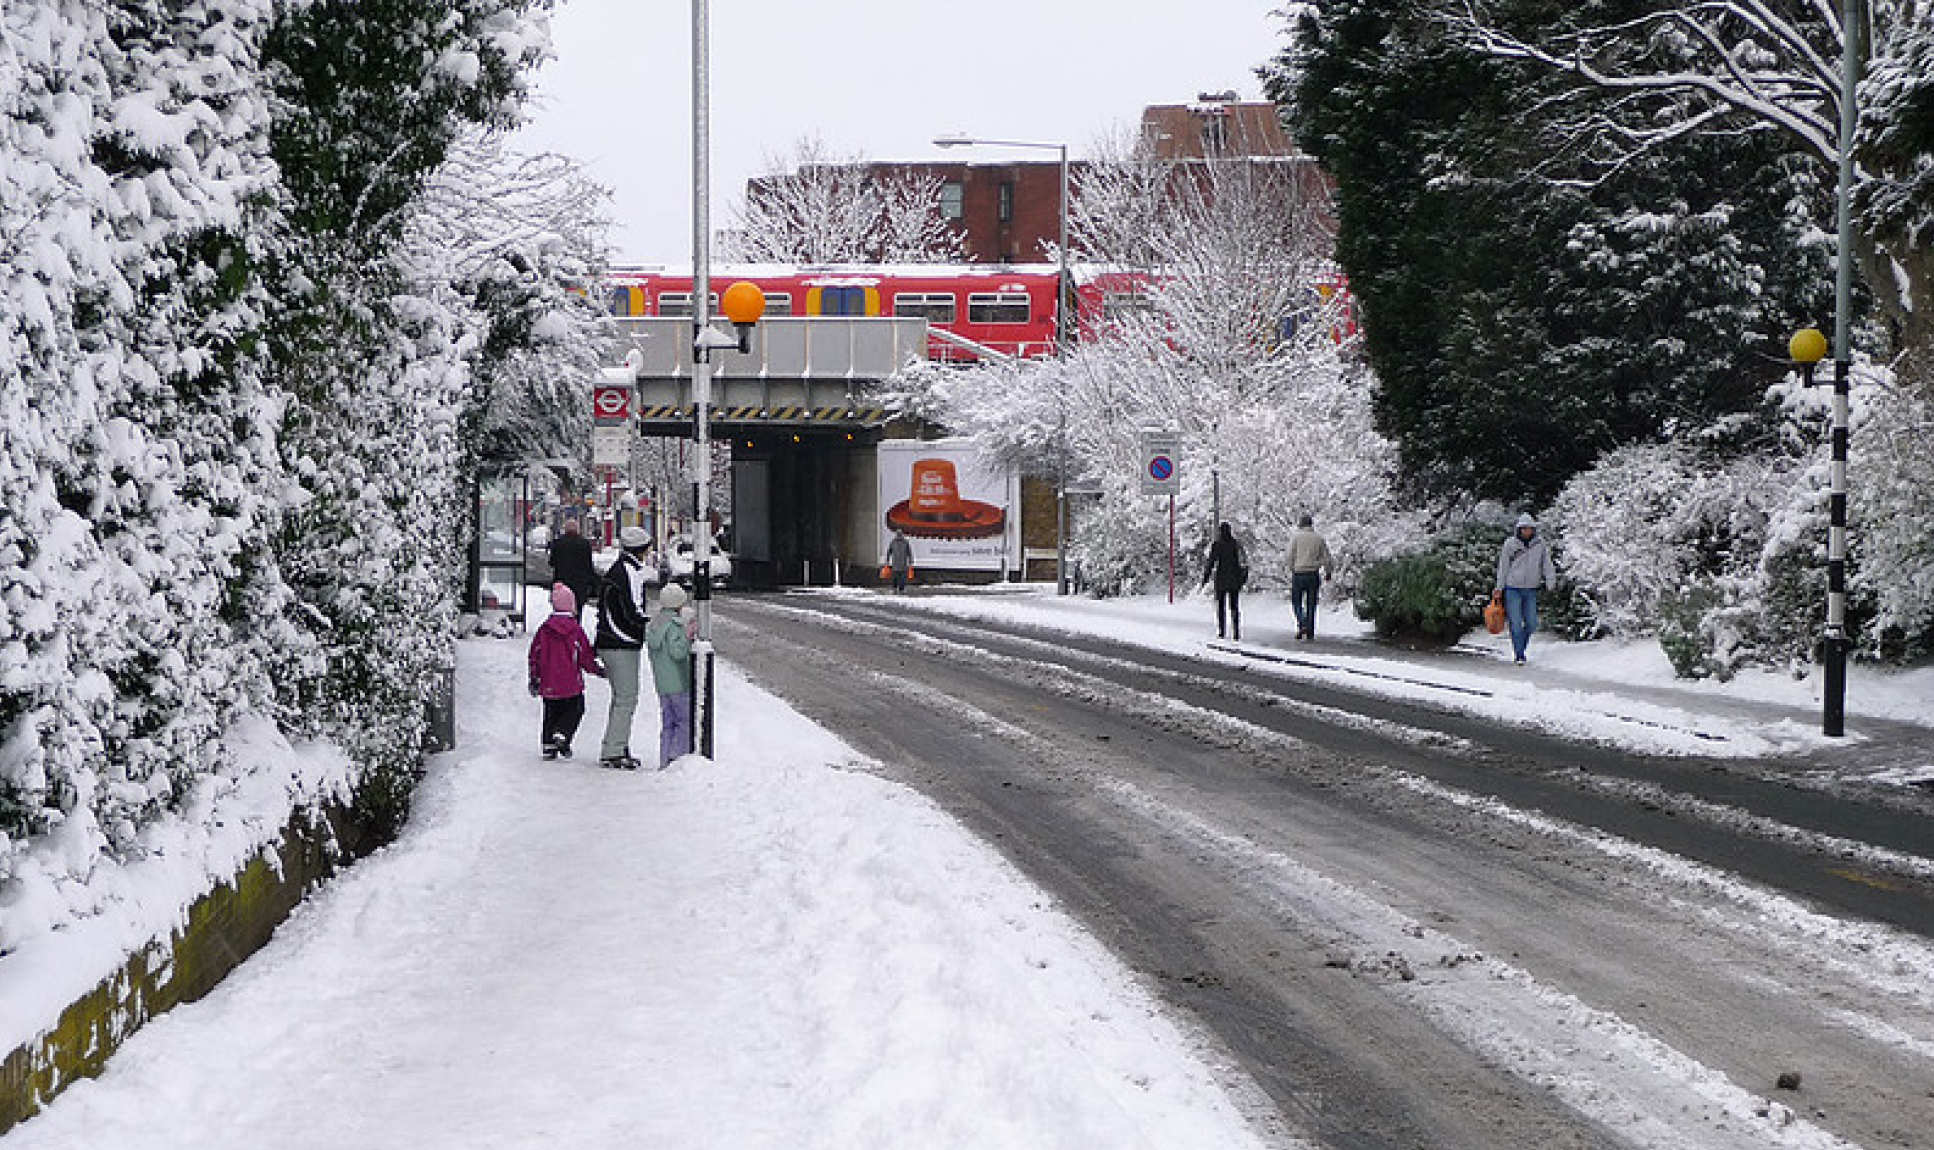 A wet, snowy roadside in an English town, woman and two kids wrapped in hats, coats and boots wait at a bus stop. People trudge along icy road opposite, a train passes on a brige over the empty road